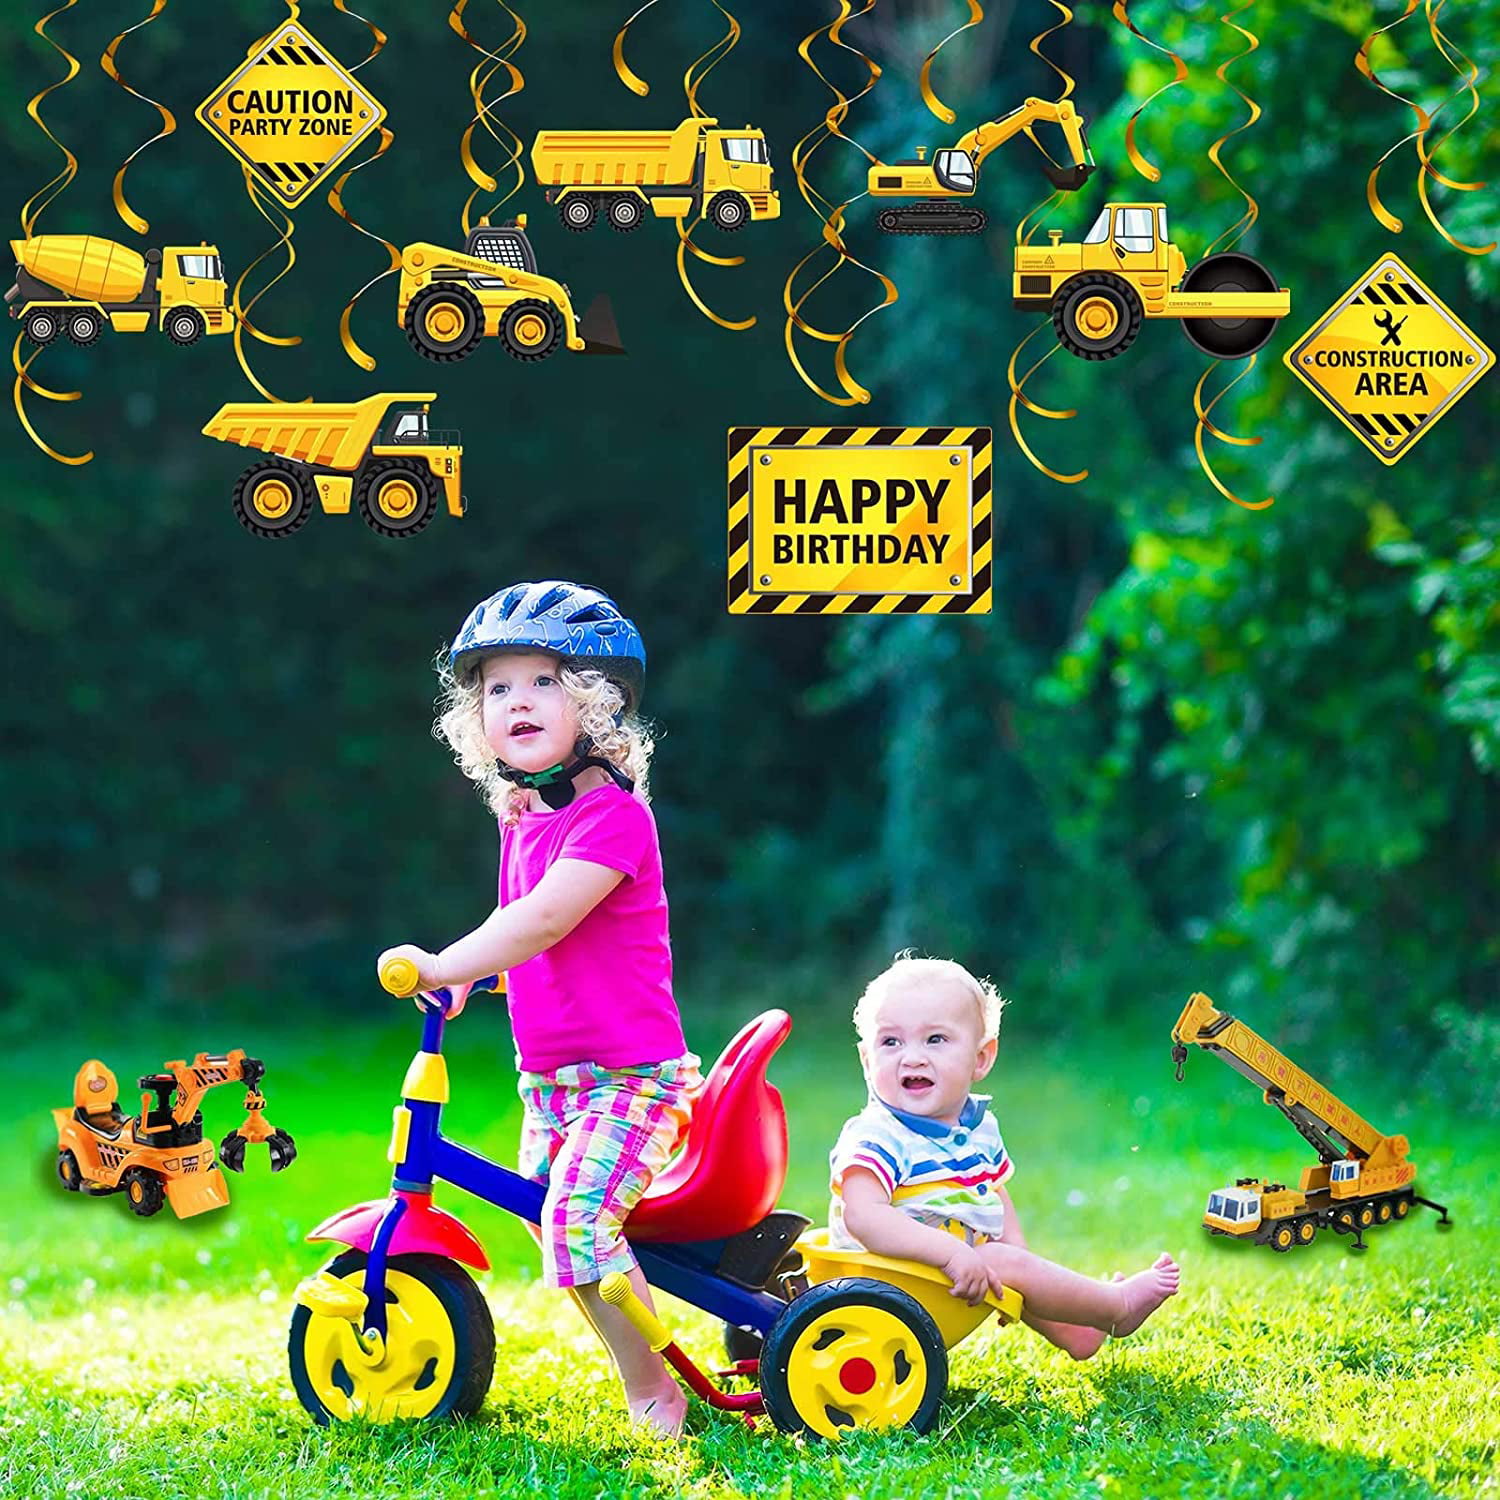 Construction Trucks Party Supplies 30 Pieces Construction Birthday Party Hanging Swirl Decoration Traffic Zone Birthday Theme Streamers Caution Signs Tractor Bulldozers Dump Truck Party Foil Swirls 